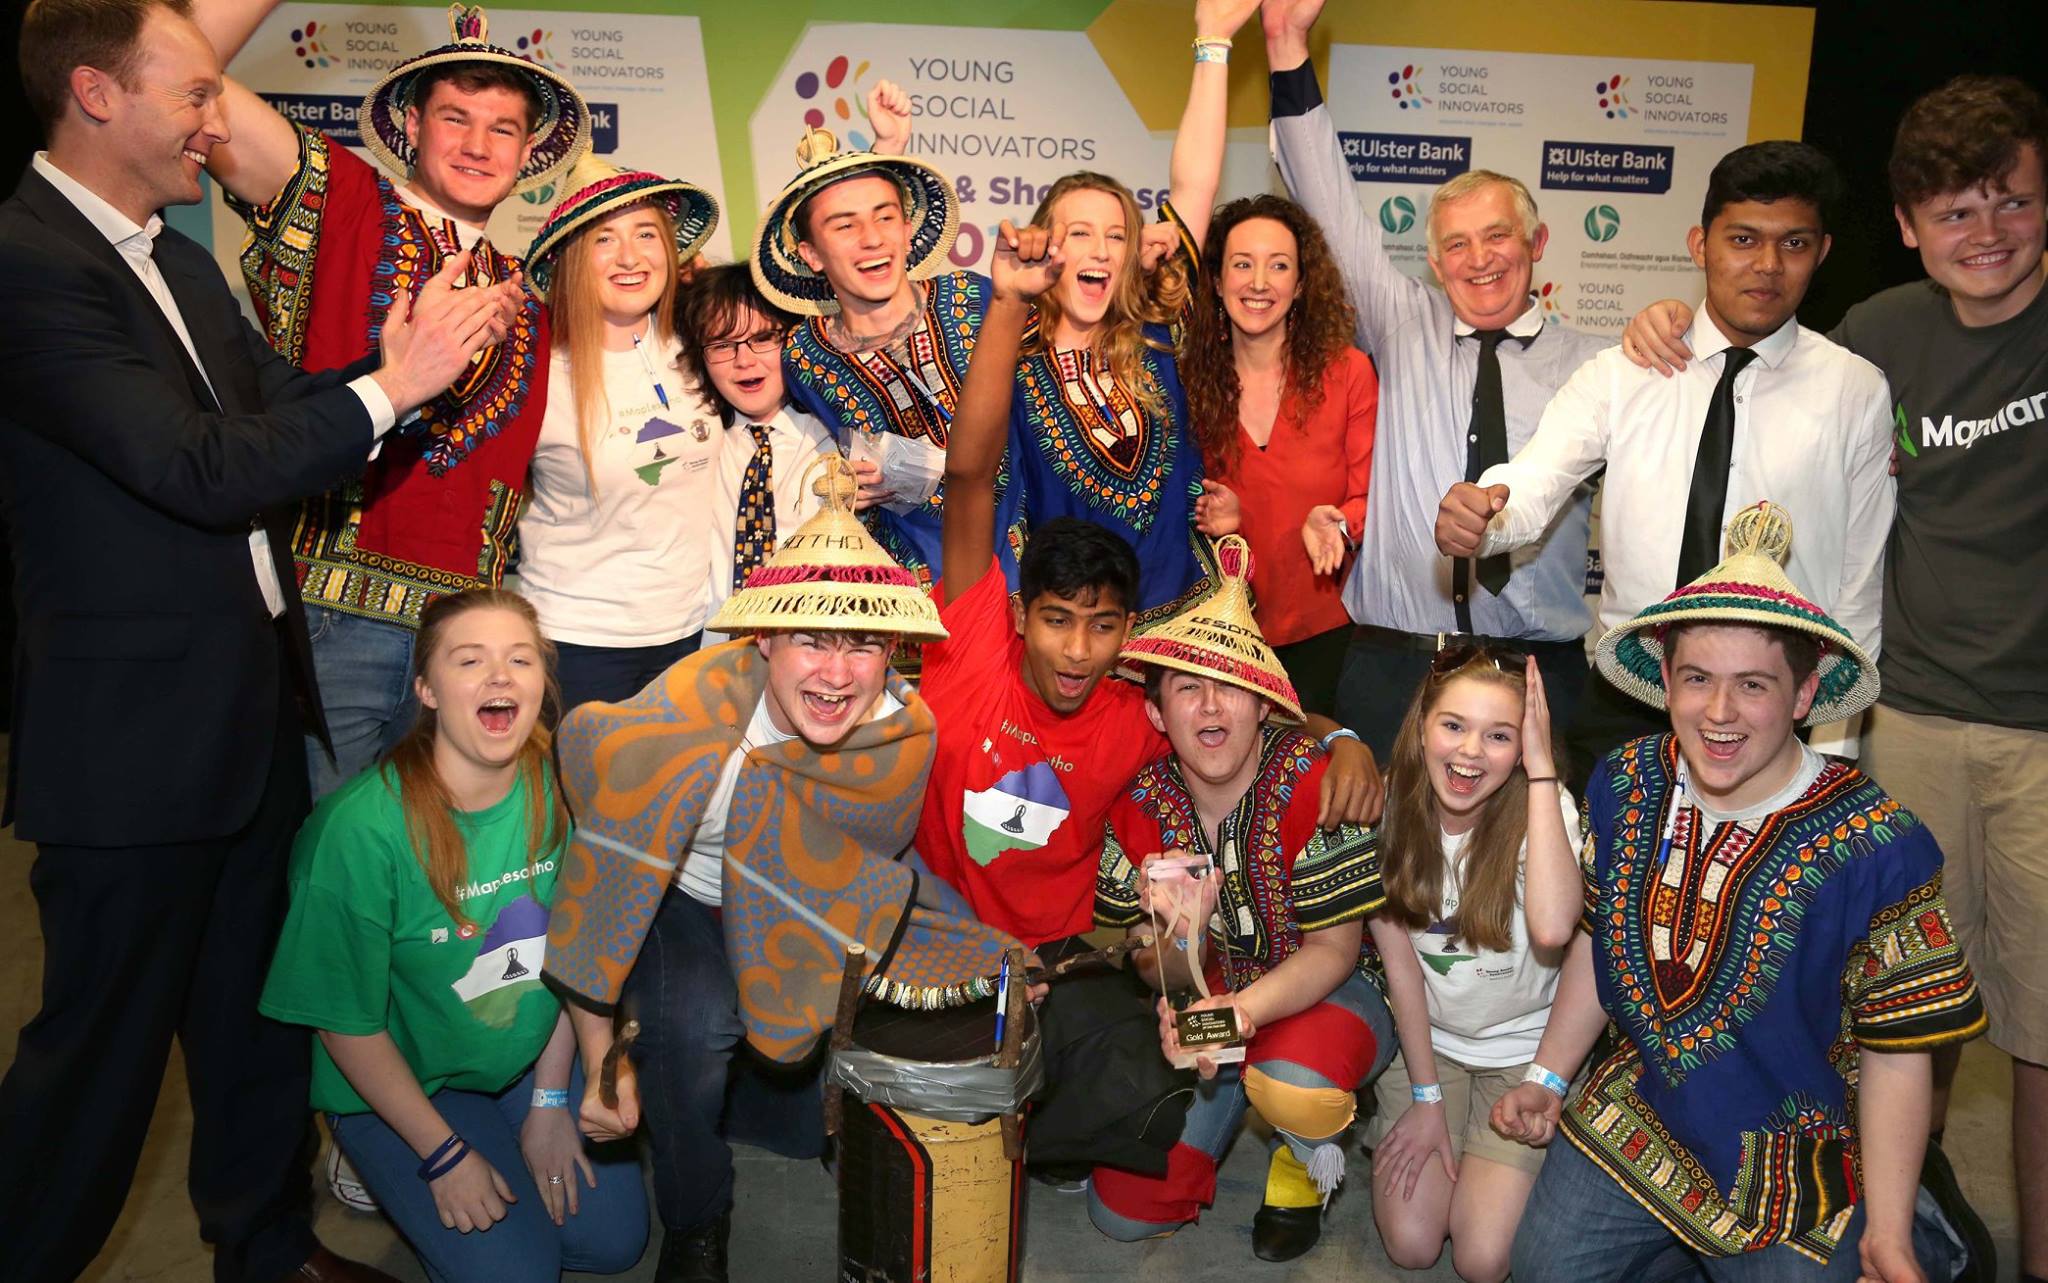 Young Social Innovators of the Year 2016 Global Citizens Mapping The Future Portmarnock Community School, Carrickhill Road, Portmarnock, Co. Dublin